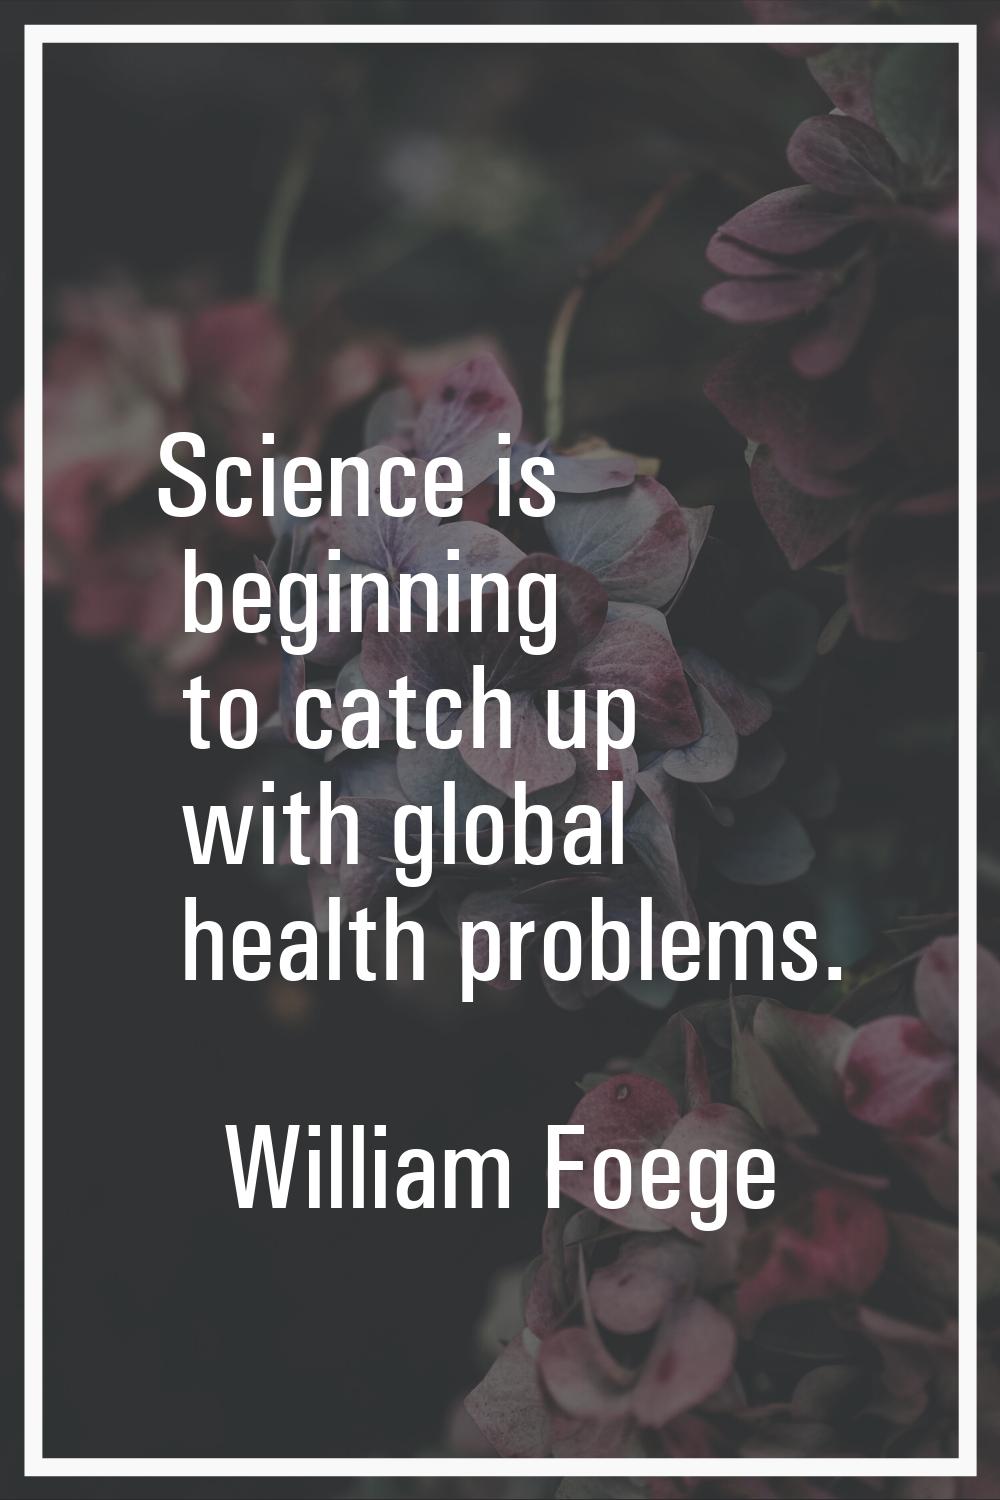 Science is beginning to catch up with global health problems.